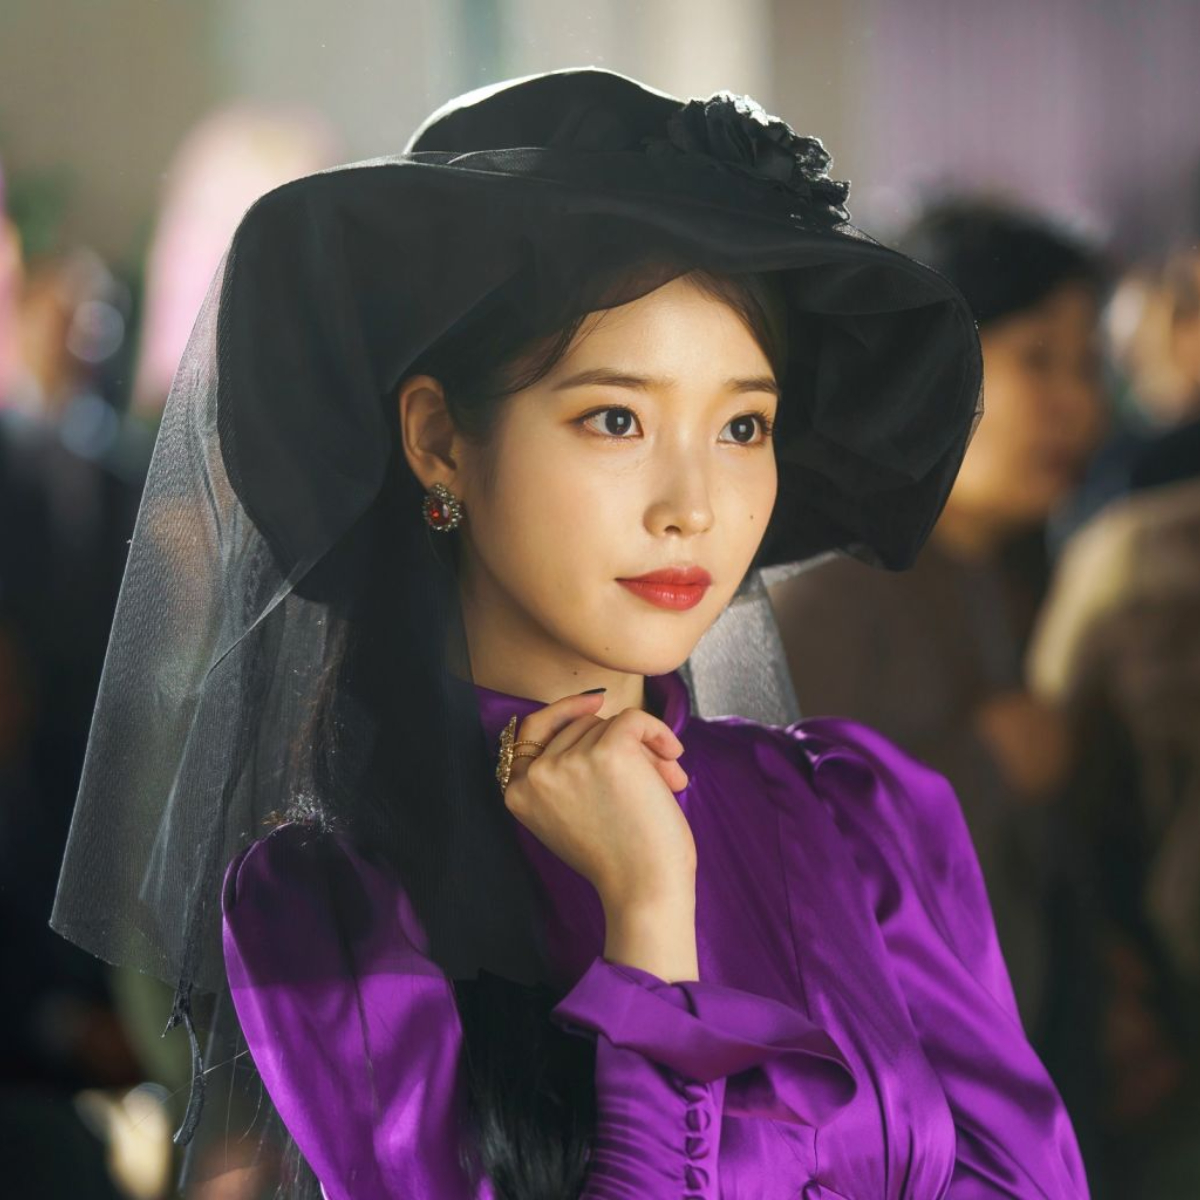 Hotel Del Luna: Here’s how IU wowed fans with her impeccable style